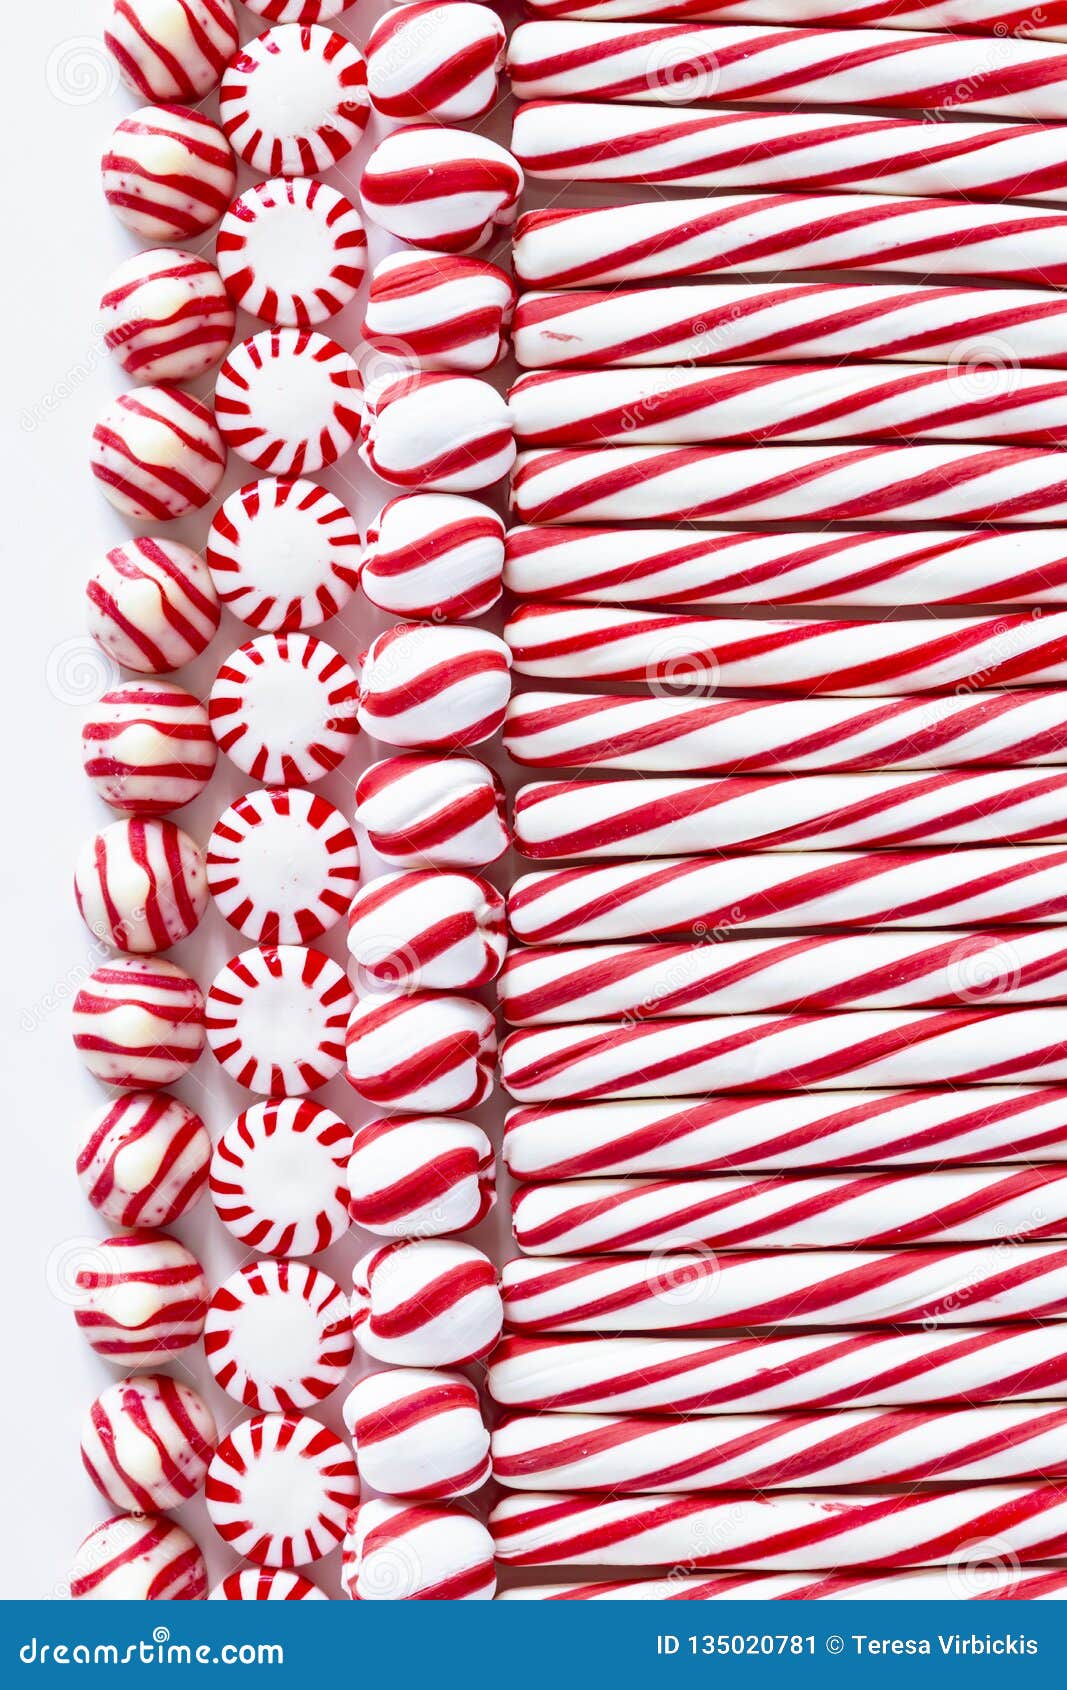 Red And White Striped Peppermint Candies Stock Image Image Of White